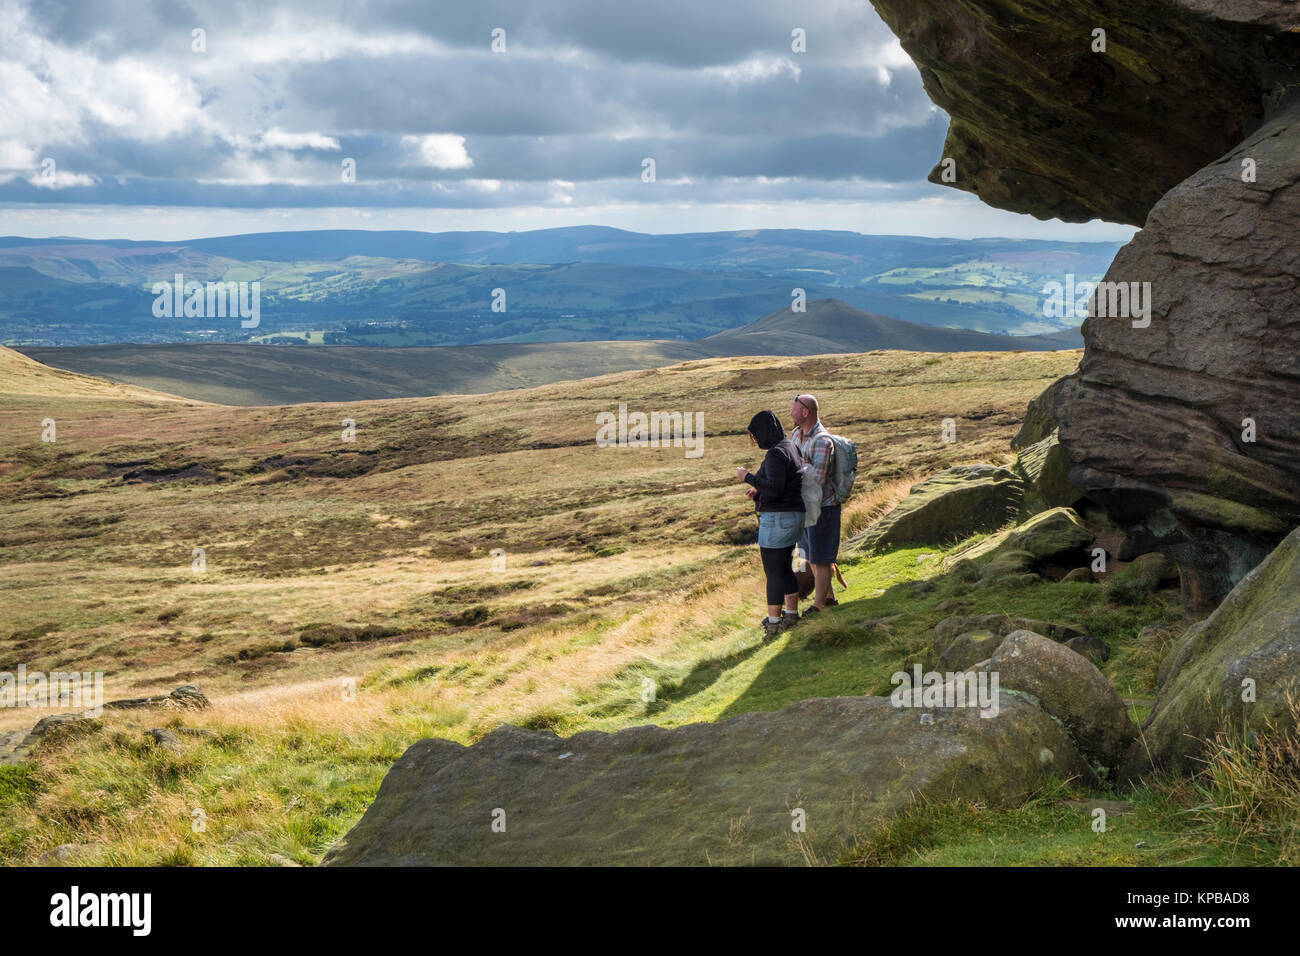 Walkers near Edale Rocks viewing the moorland scenery and the scenic countryside views, Kinder Scout, Derbyshire, Peak District, England, UK Stock Photo